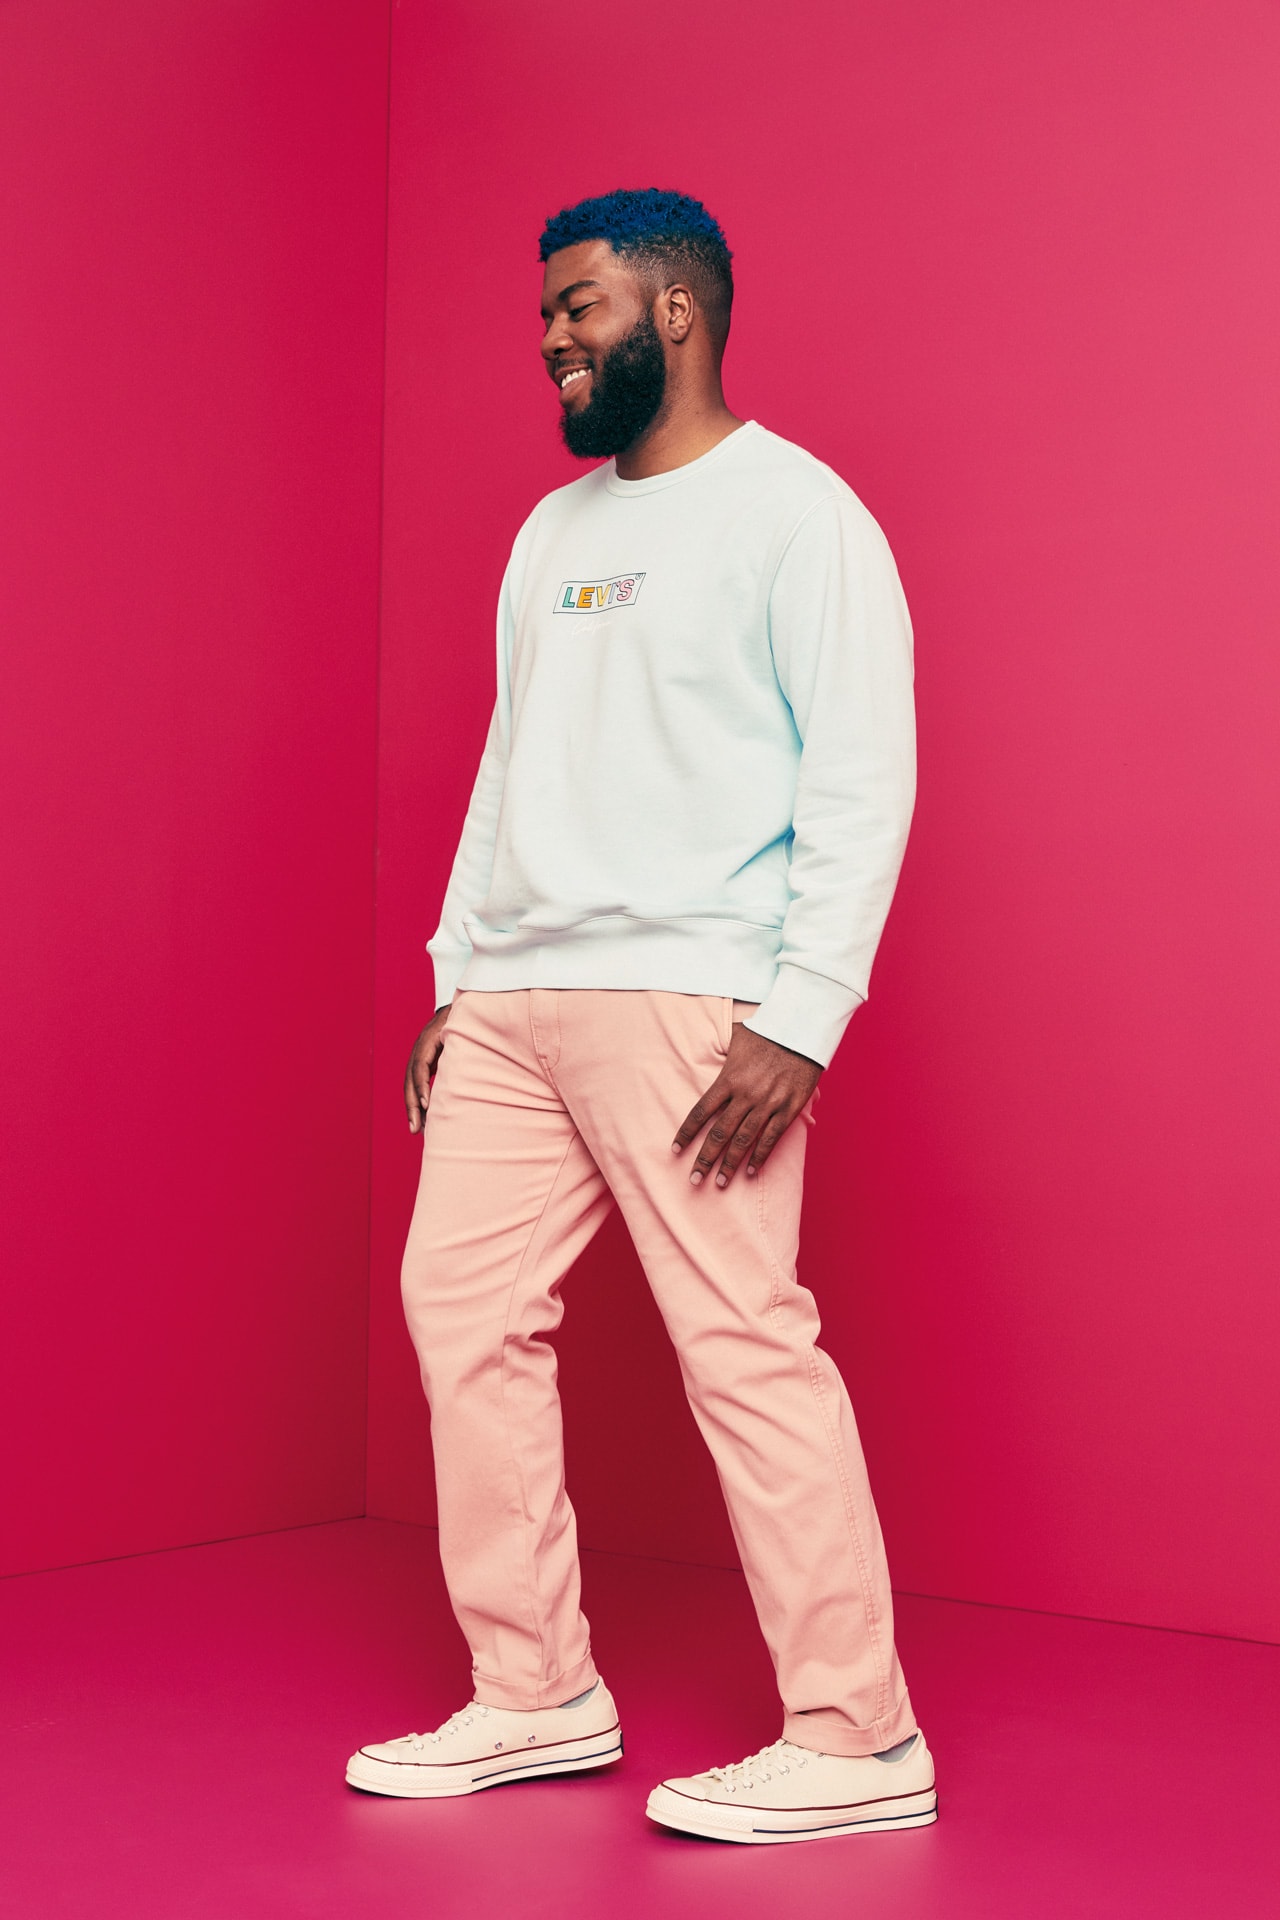 Levi's XX Chino Launch with Khalid in Miami | Hypebeast